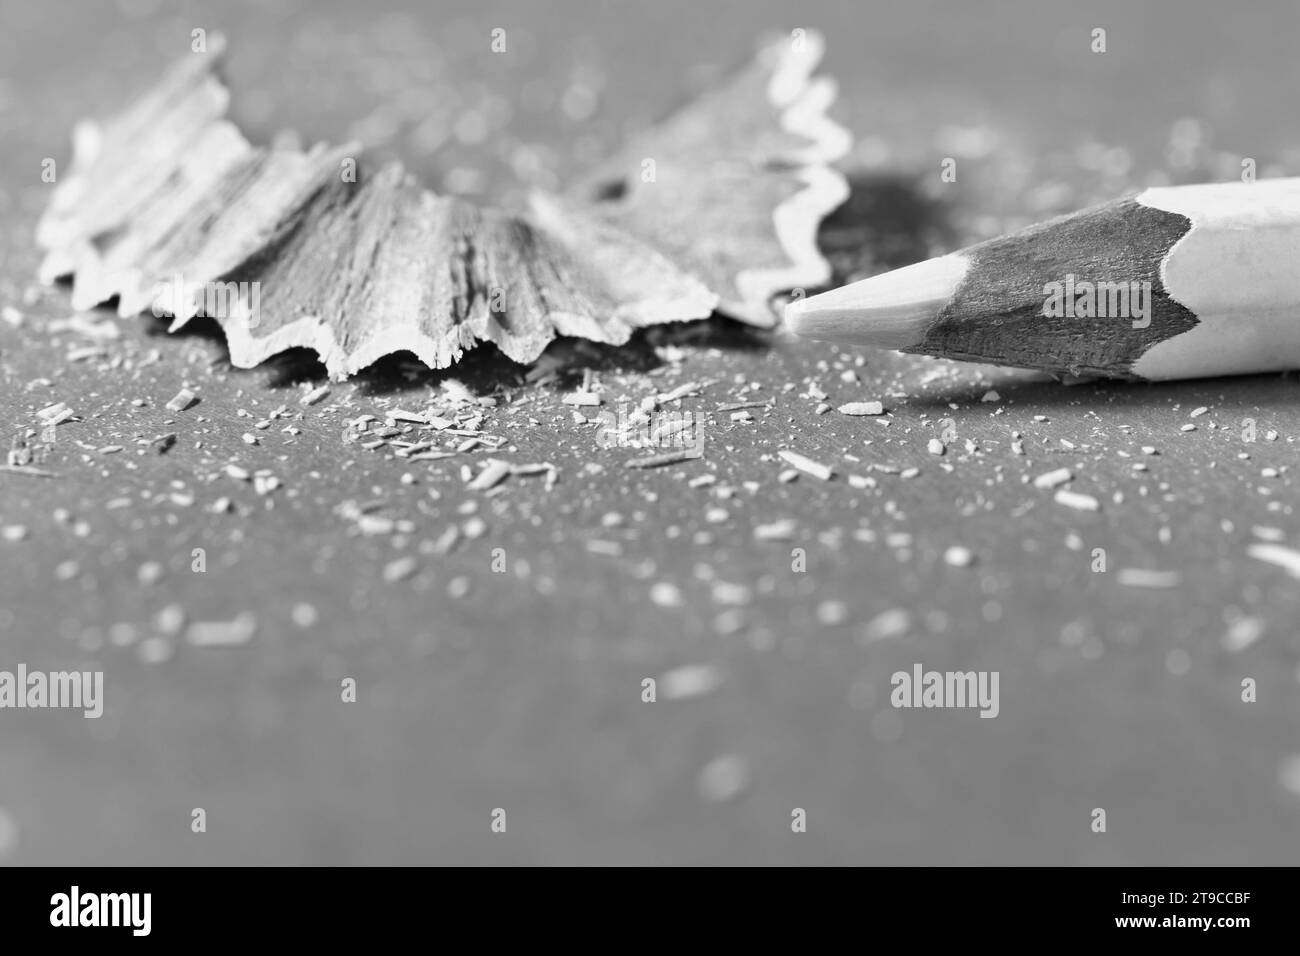 Pointed wooden pencil on table with shavings ,place of work or leisure time Stock Photo